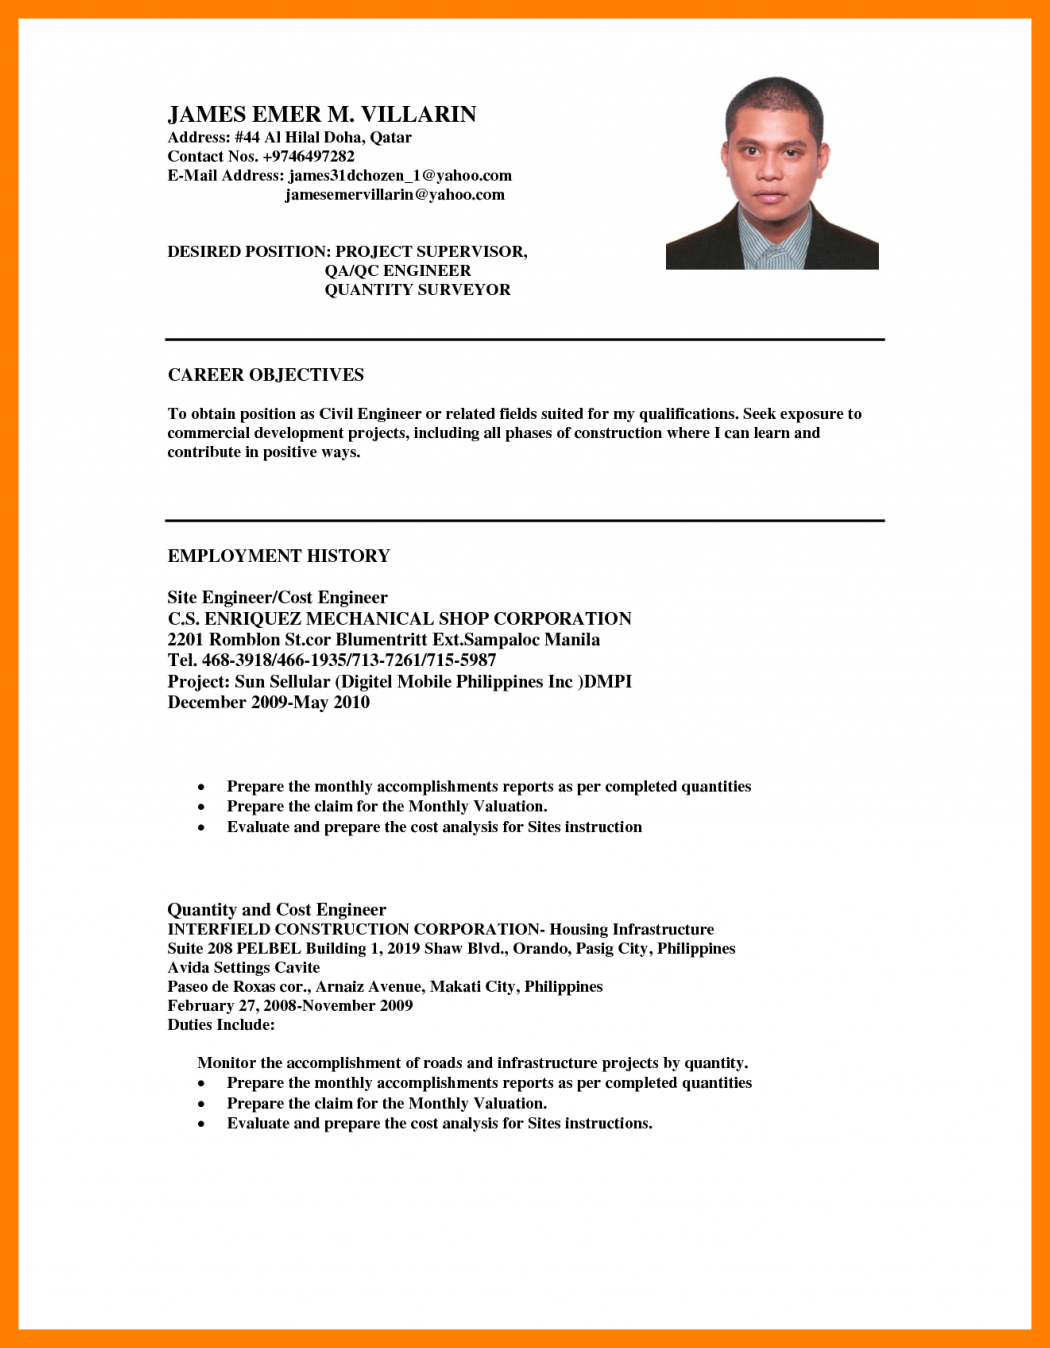 Examples Of Objectives For Resumes Resume Sample For Ojt Tourism Students Objectives In Examples Of Career Objective General Samples Fresh examples of objectives for resumes|wikiresume.com